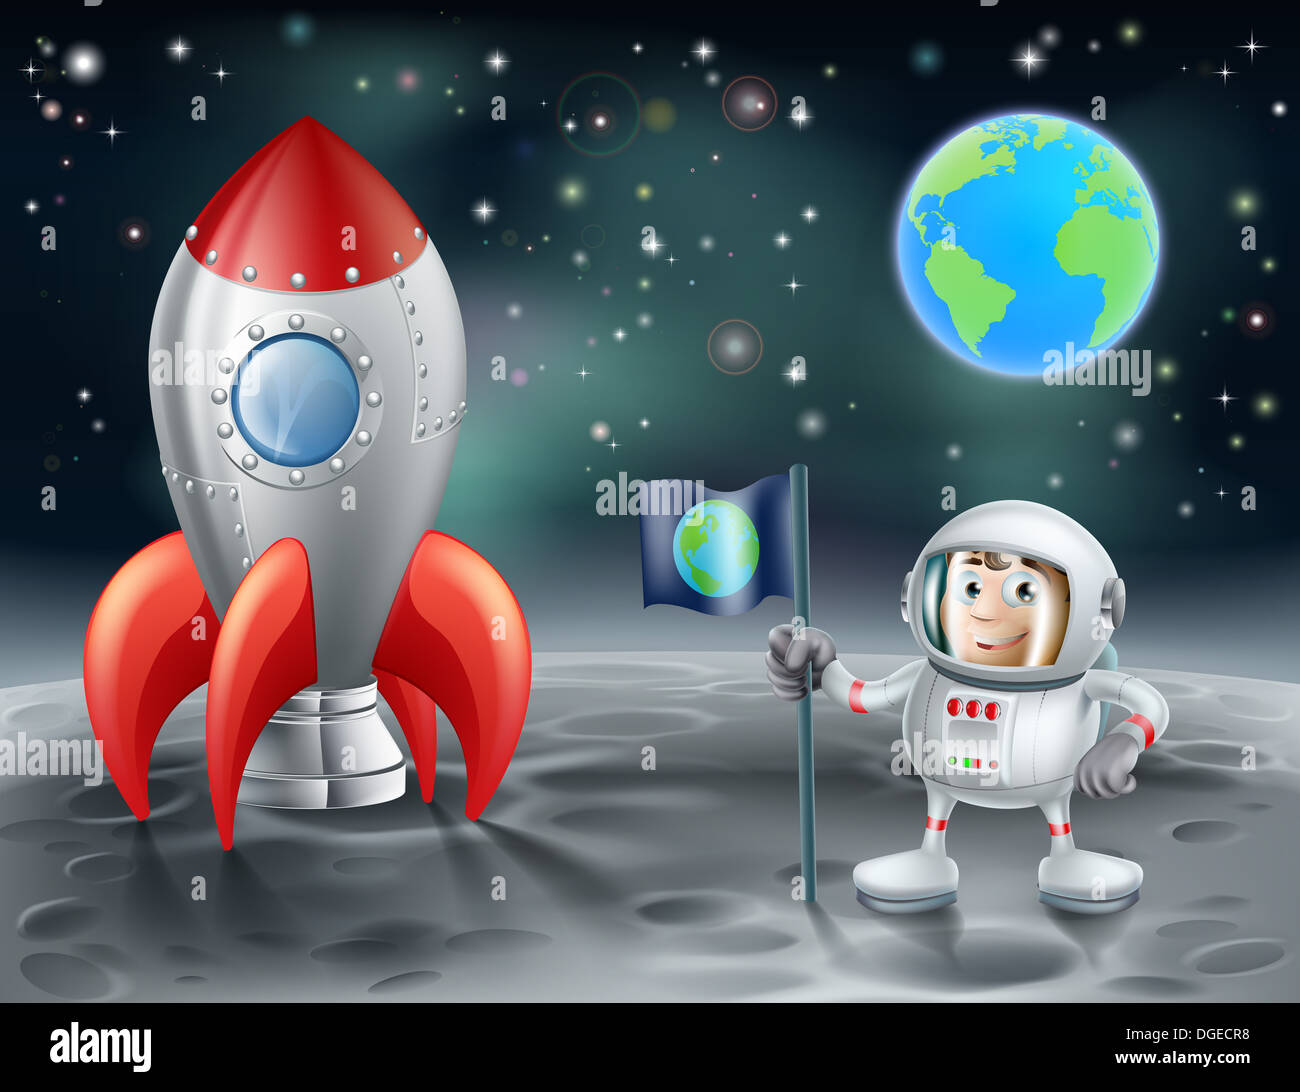 An illustration of a cartoon astronaut and vintage space rocket on the moon with the planet earth in the distance Stock Photo